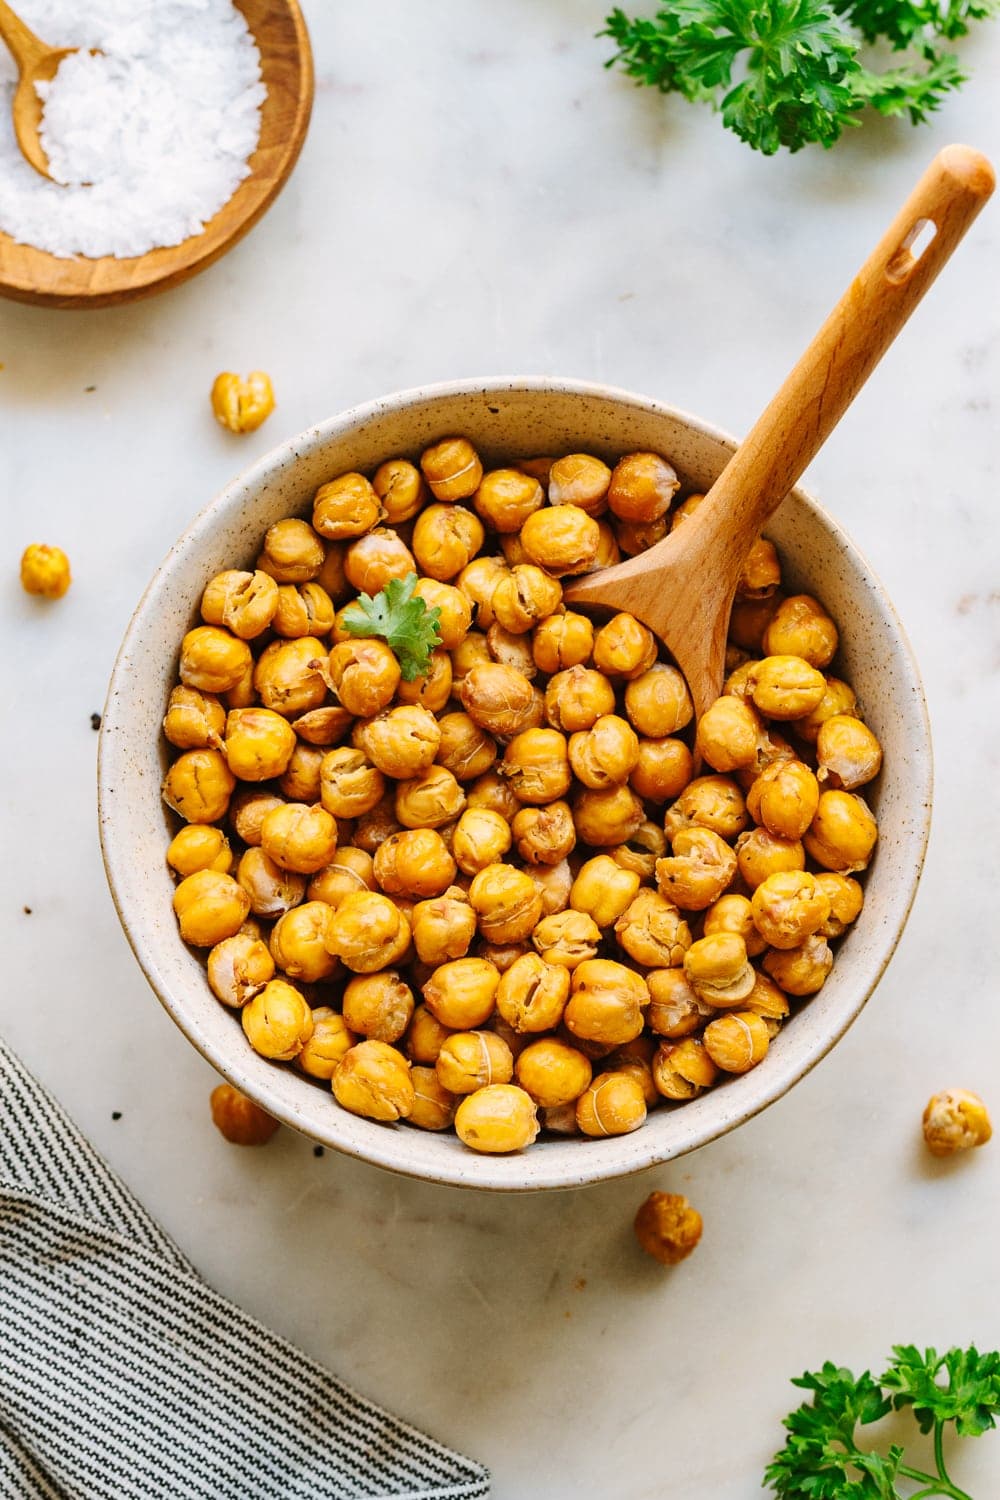 top down view of bowl full of crispy roasted chickpeas with wooden spoon for scooping.